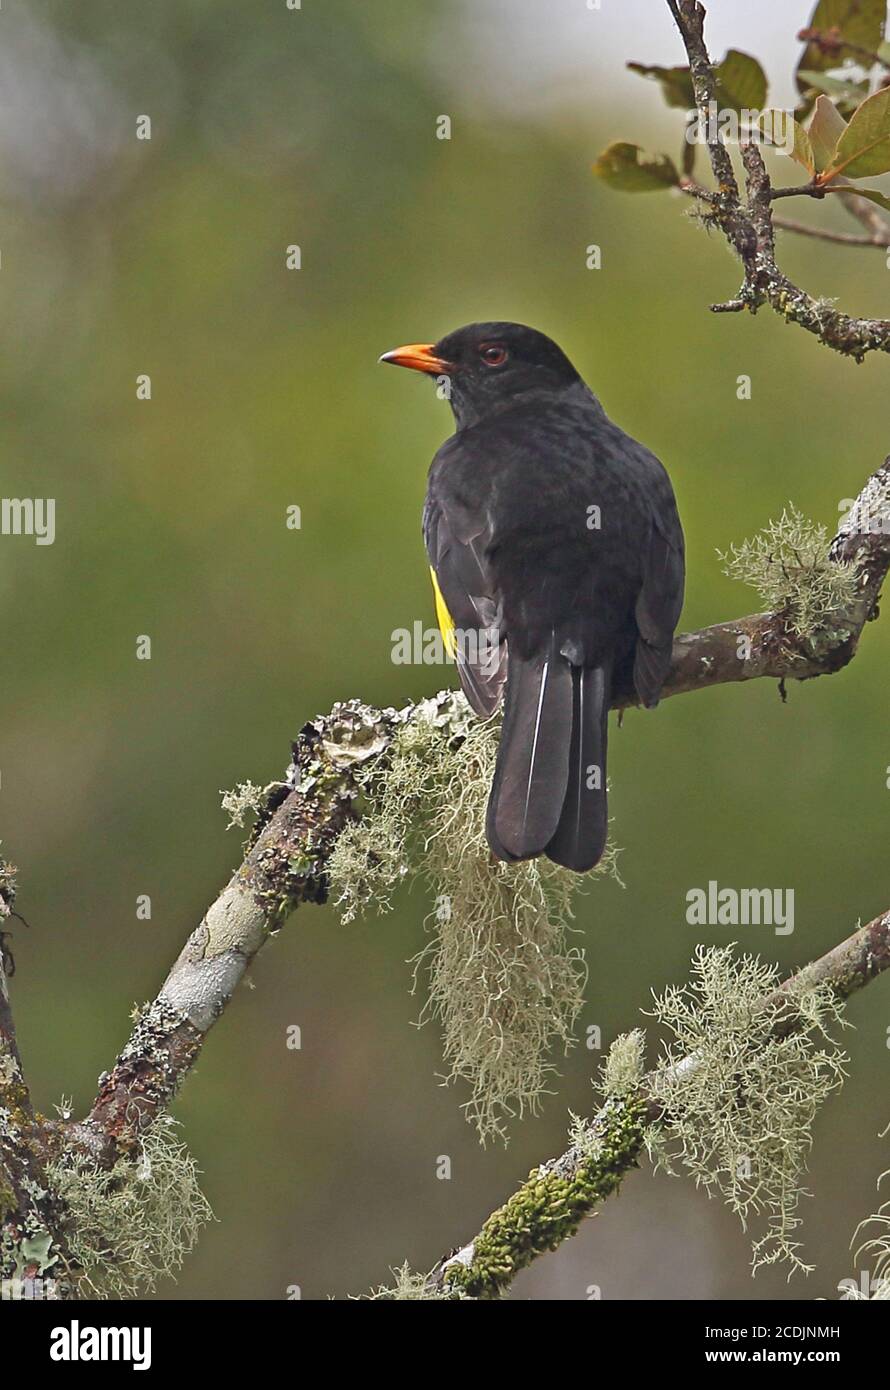 Black-and-gold Cotinga (Tijuca atra) adult male perched on branch   Atlantic Rainforest, Brazil    June Stock Photo